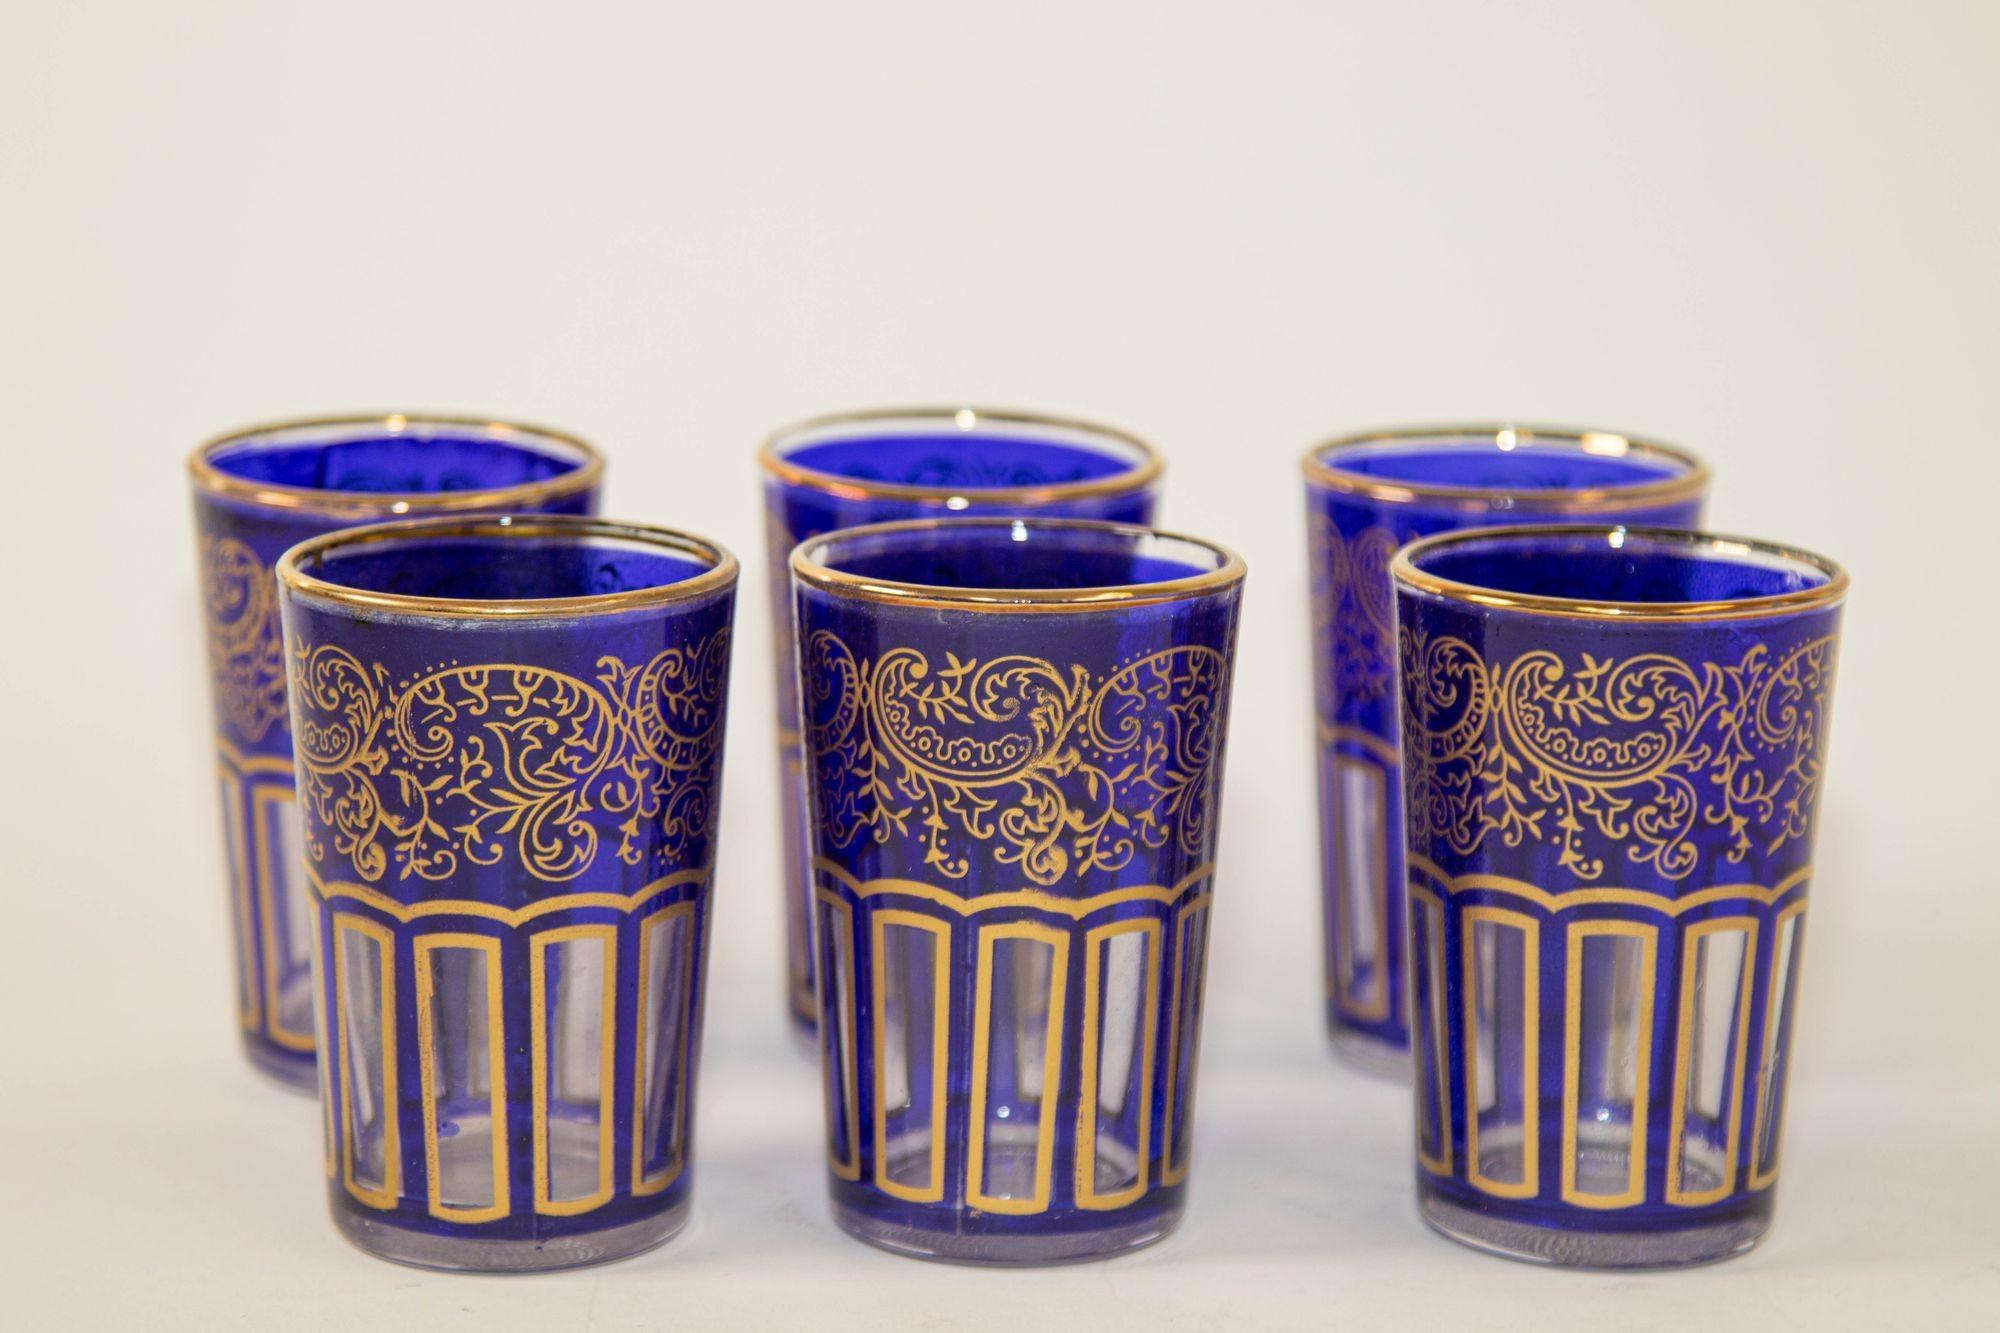 Moroccan Royal Blue Small Glasses with Gold Moorish Design.
Set of 6. Set of six royal cobalt blue shot drinking glasses barware with gold Moorish Arabesque design.
These beautiful Moroccan drinking glasses are decorated with a classical arabesque